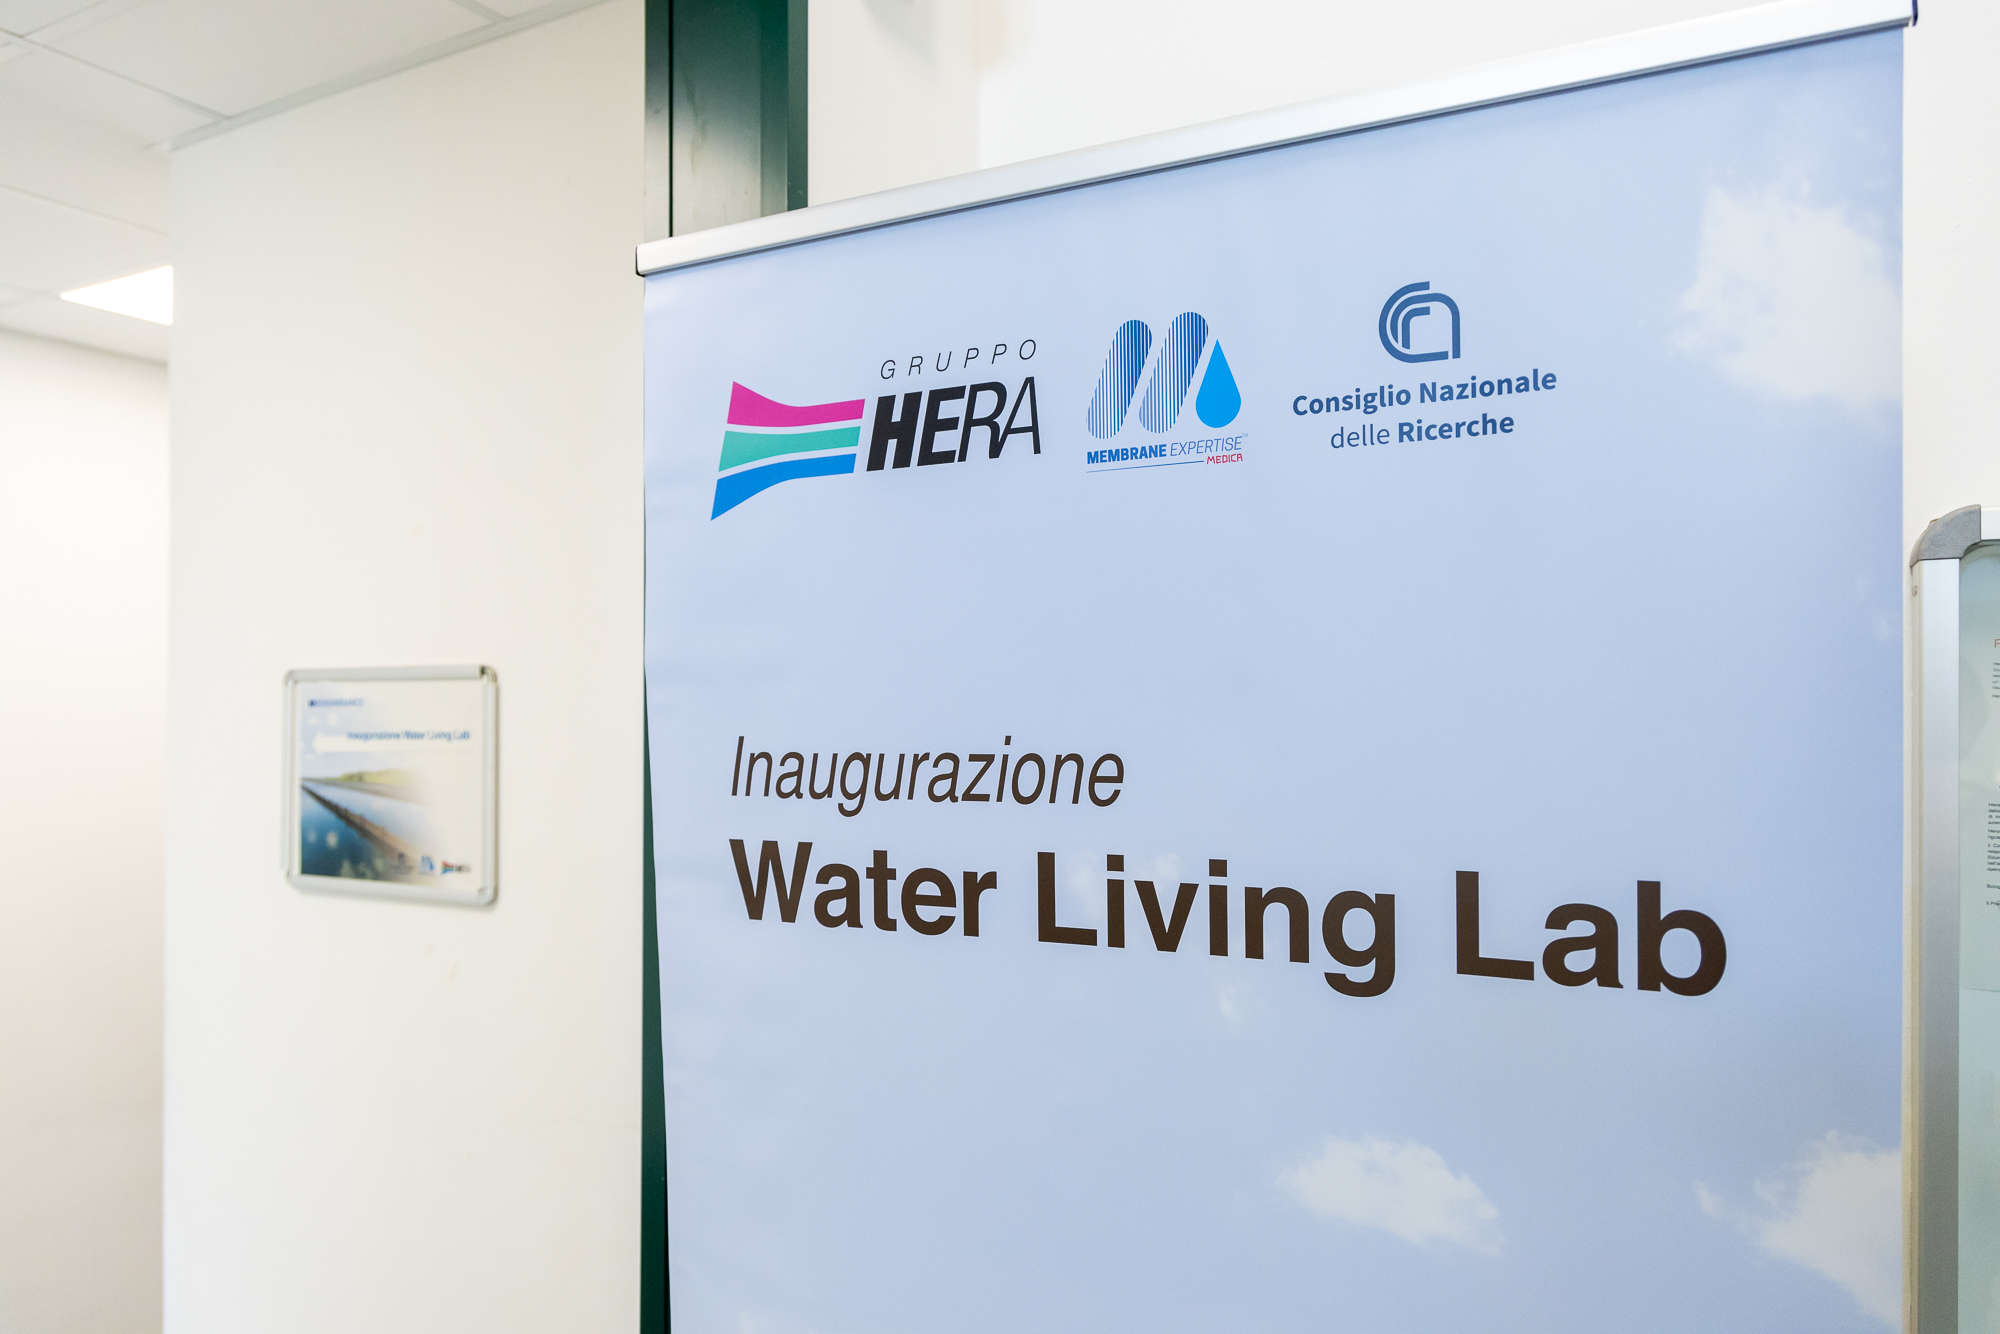 WATER LIVING LAB INAUGURATED IN HER...